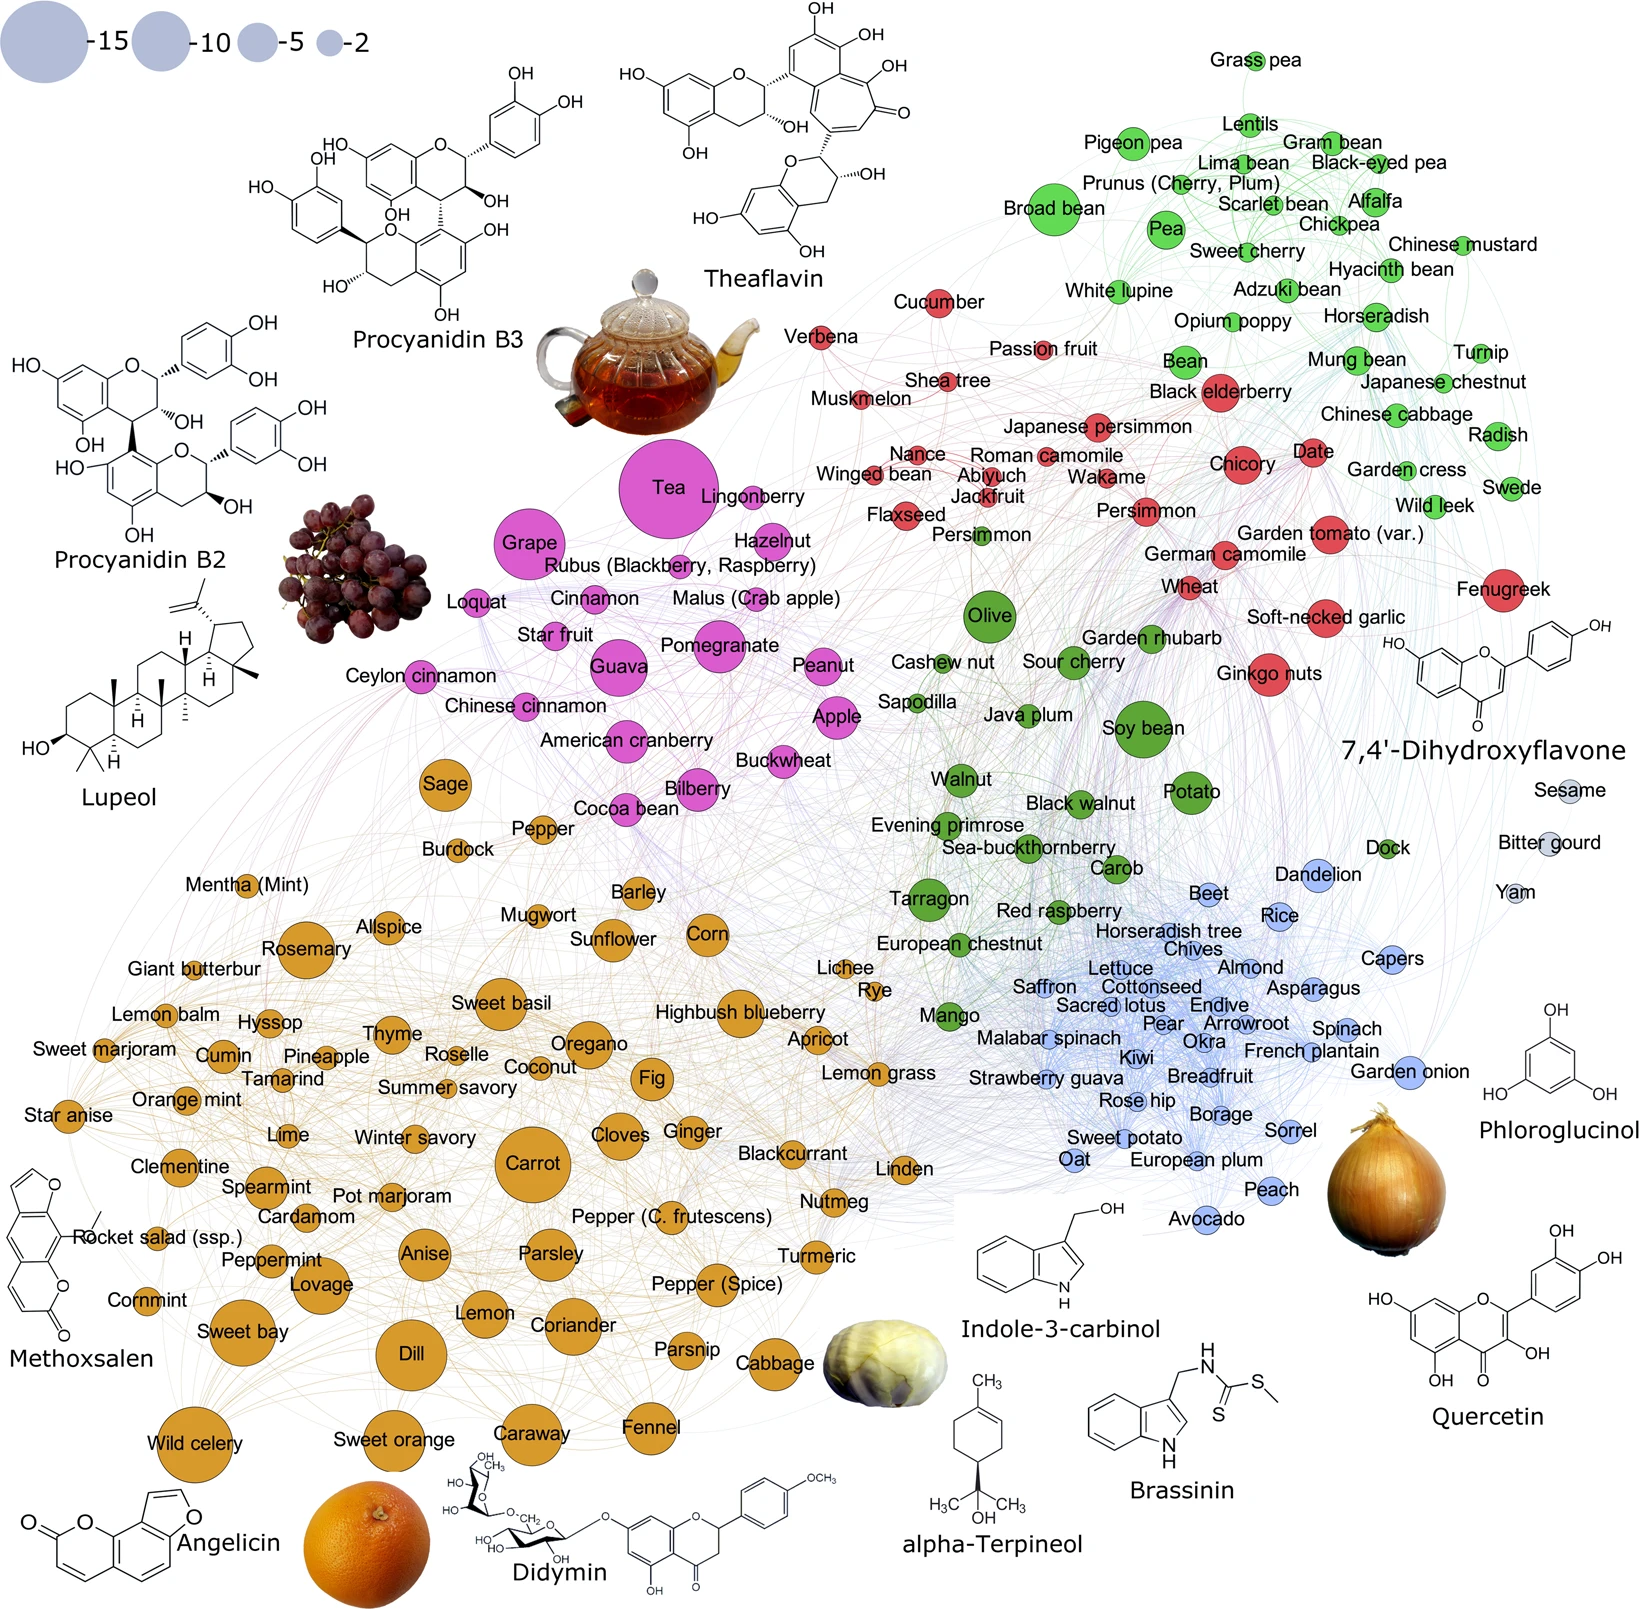 HyperFoods: Machine intelligent mapping of cancer-beating molecules in foods